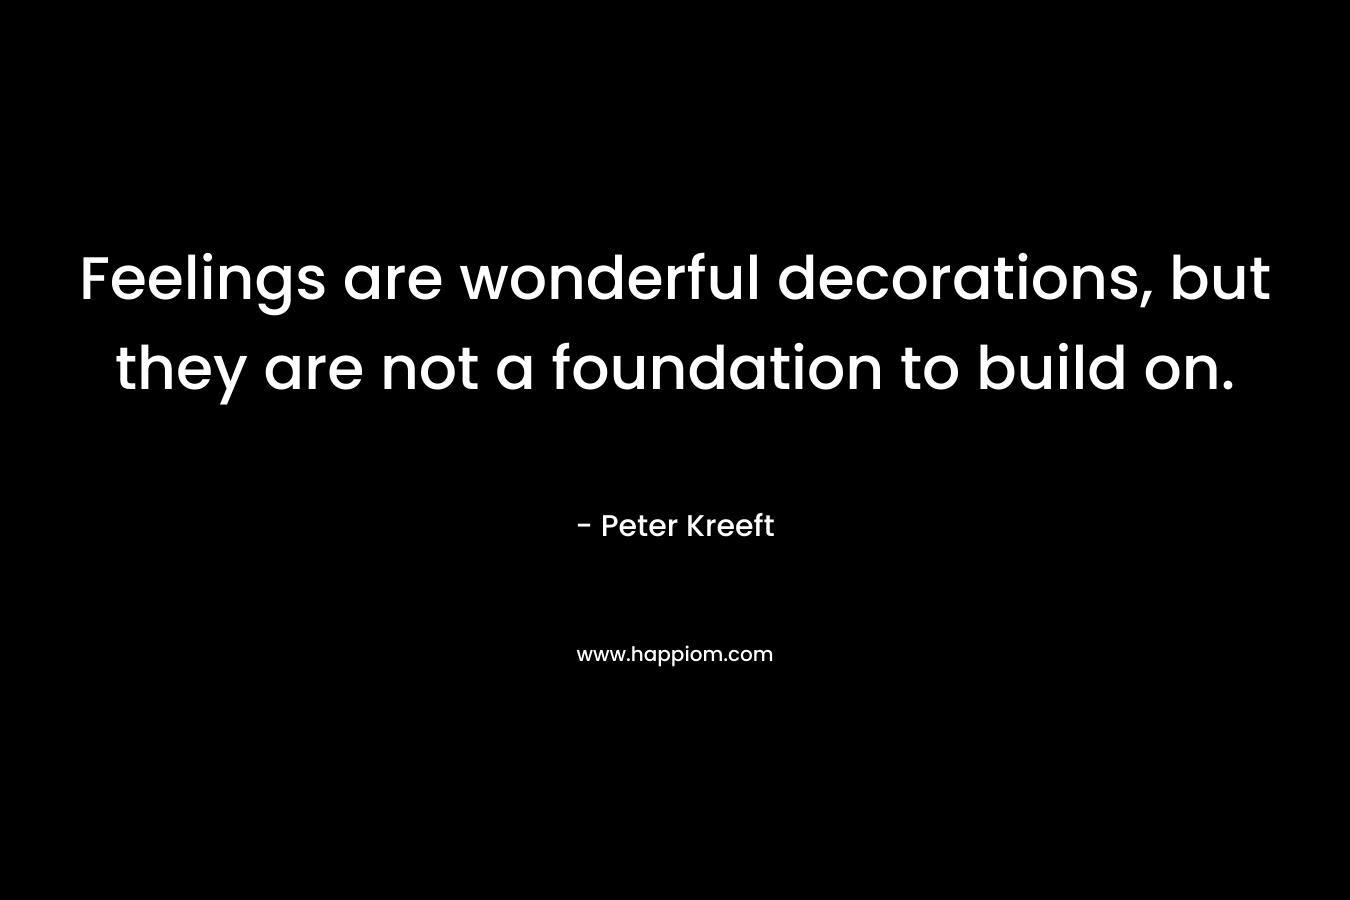 Feelings are wonderful decorations, but they are not a foundation to build on. – Peter Kreeft